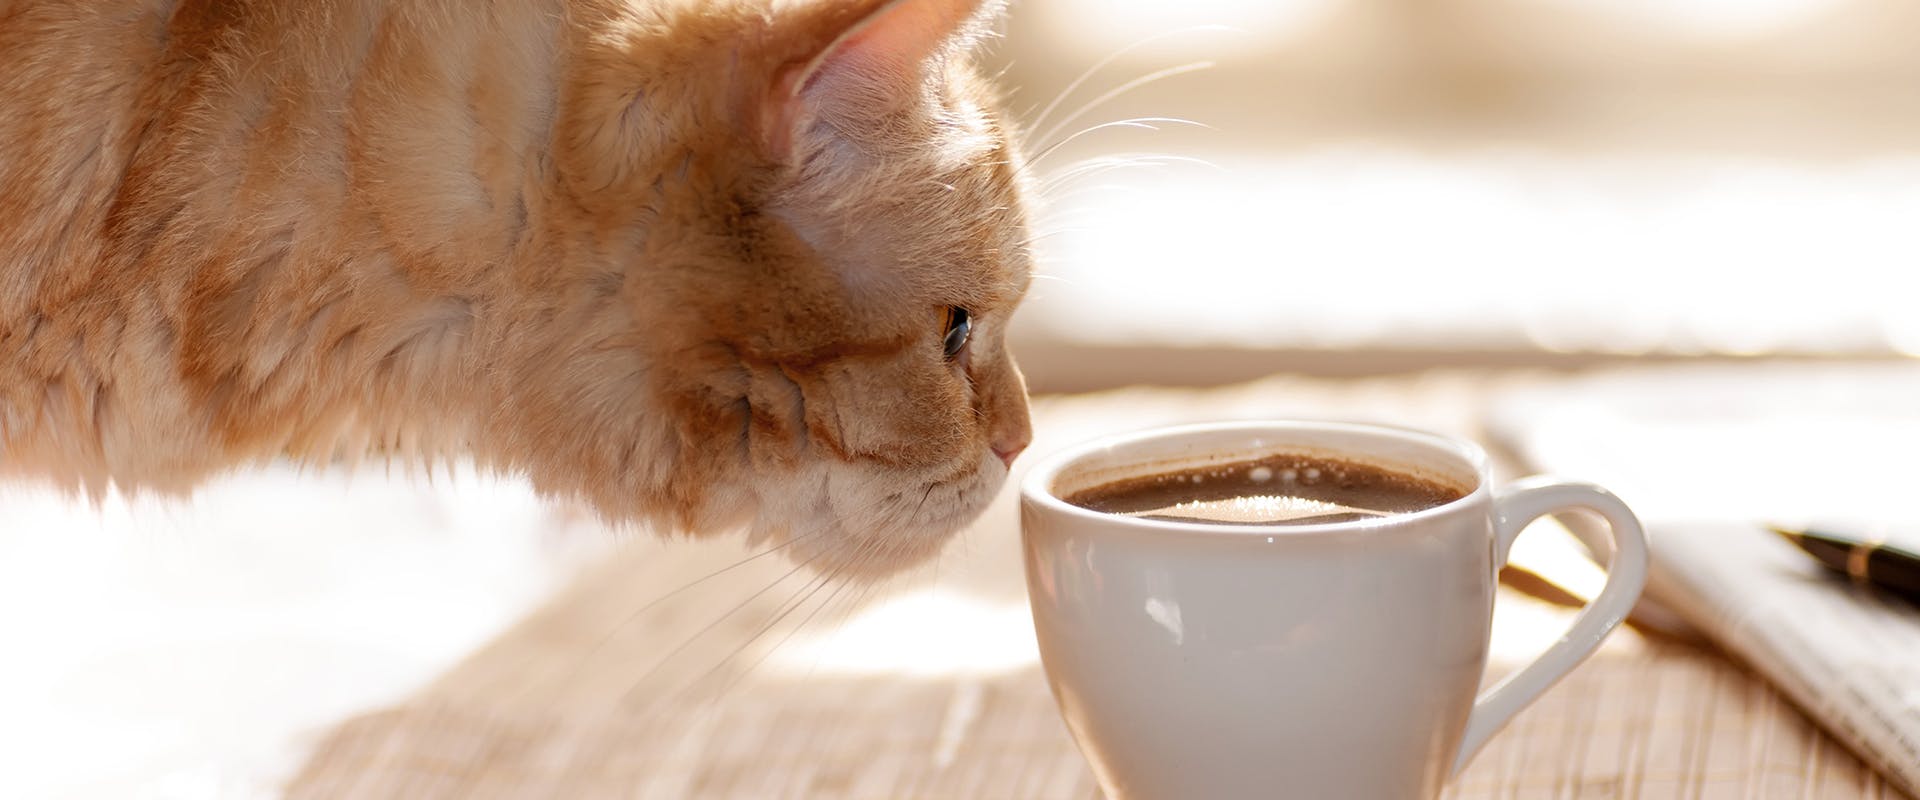 A cat sniffing a cup of coffee